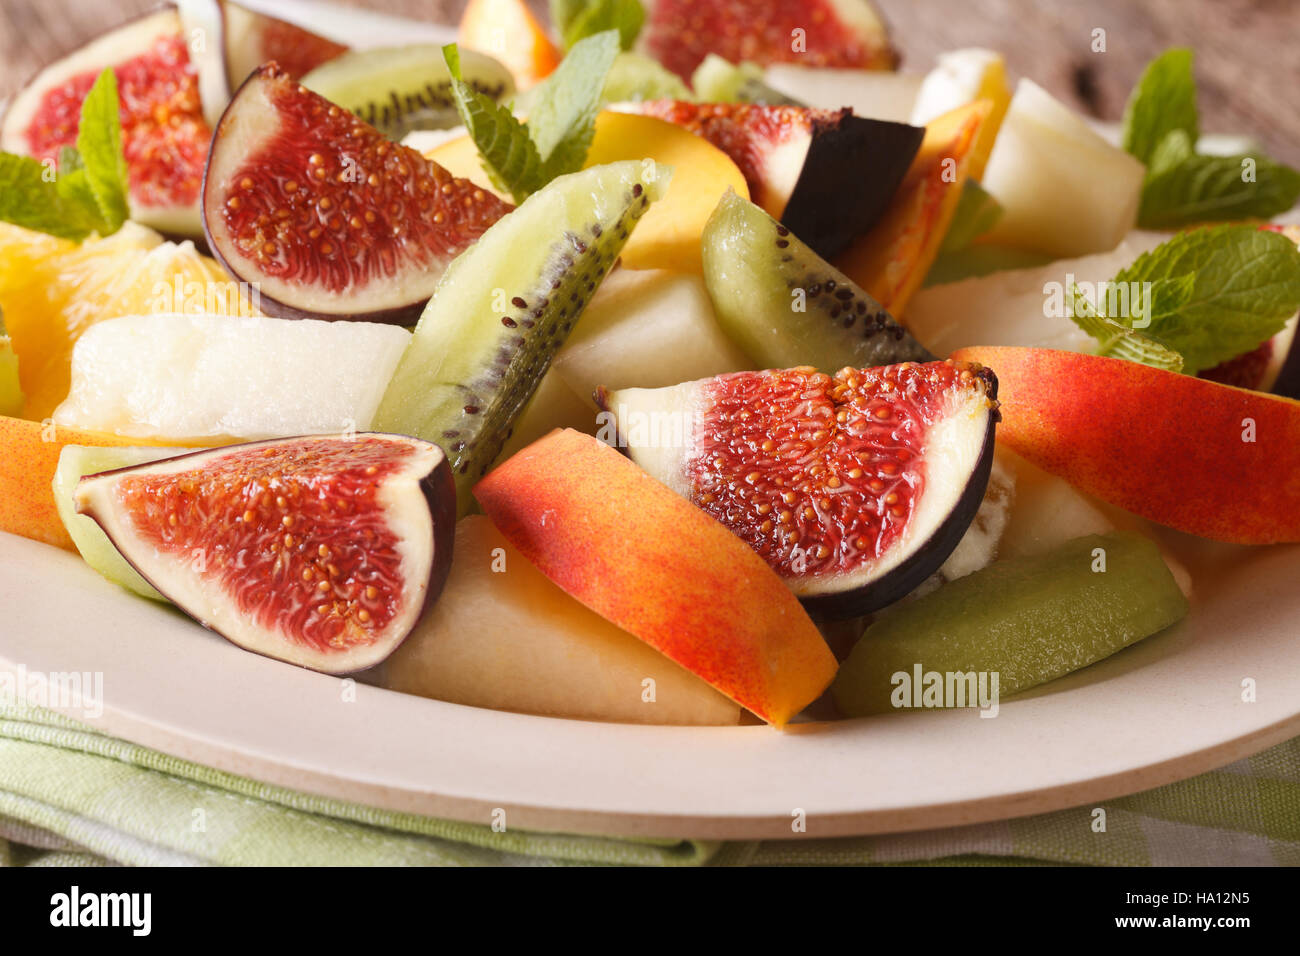 Sliced fresh fruit: figs, peaches, melons, kiwi and orange close-up on a plate. horizontal Stock Photo